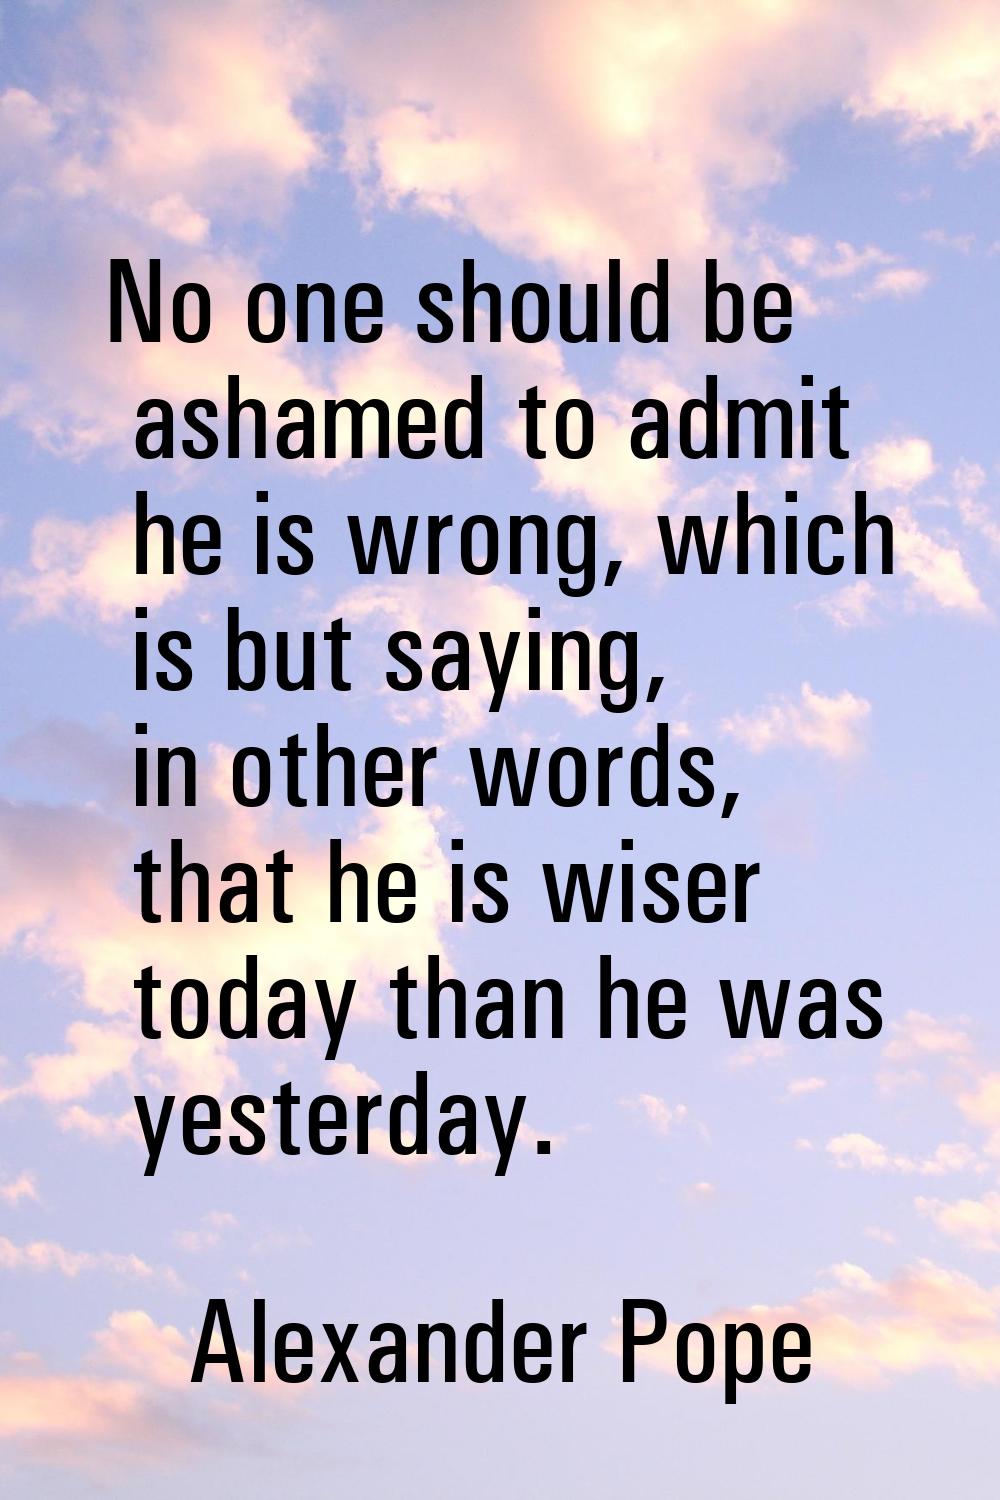 No one should be ashamed to admit he is wrong, which is but saying, in other words, that he is wise